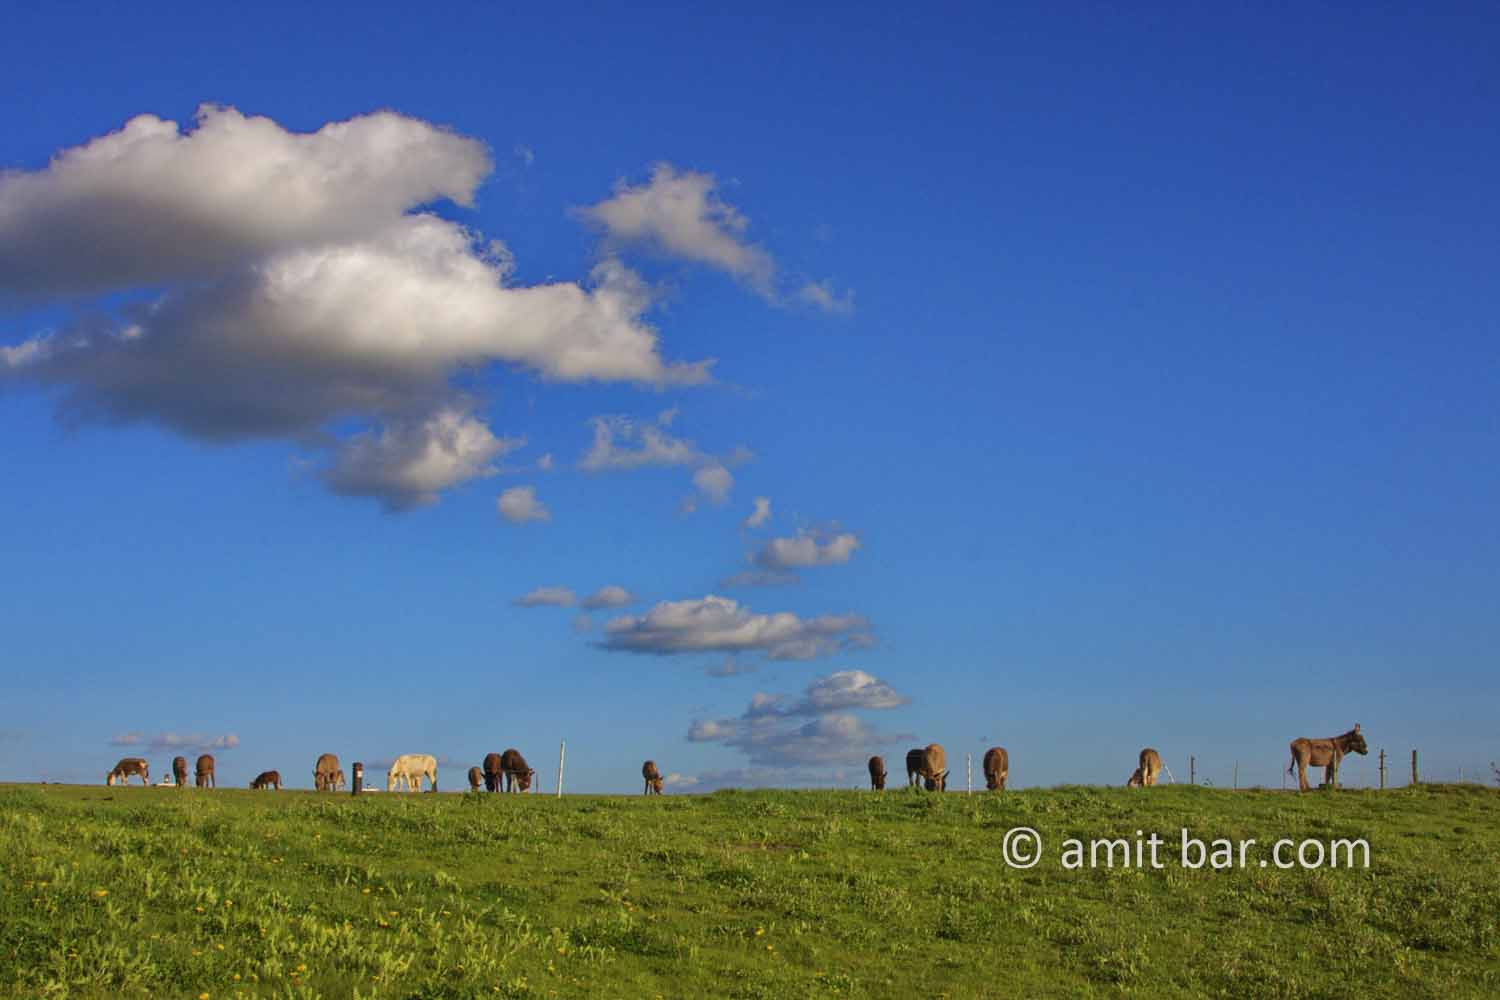 Donkeys with clouds: Donkeys with clouds in Zelhem, The Netherlands